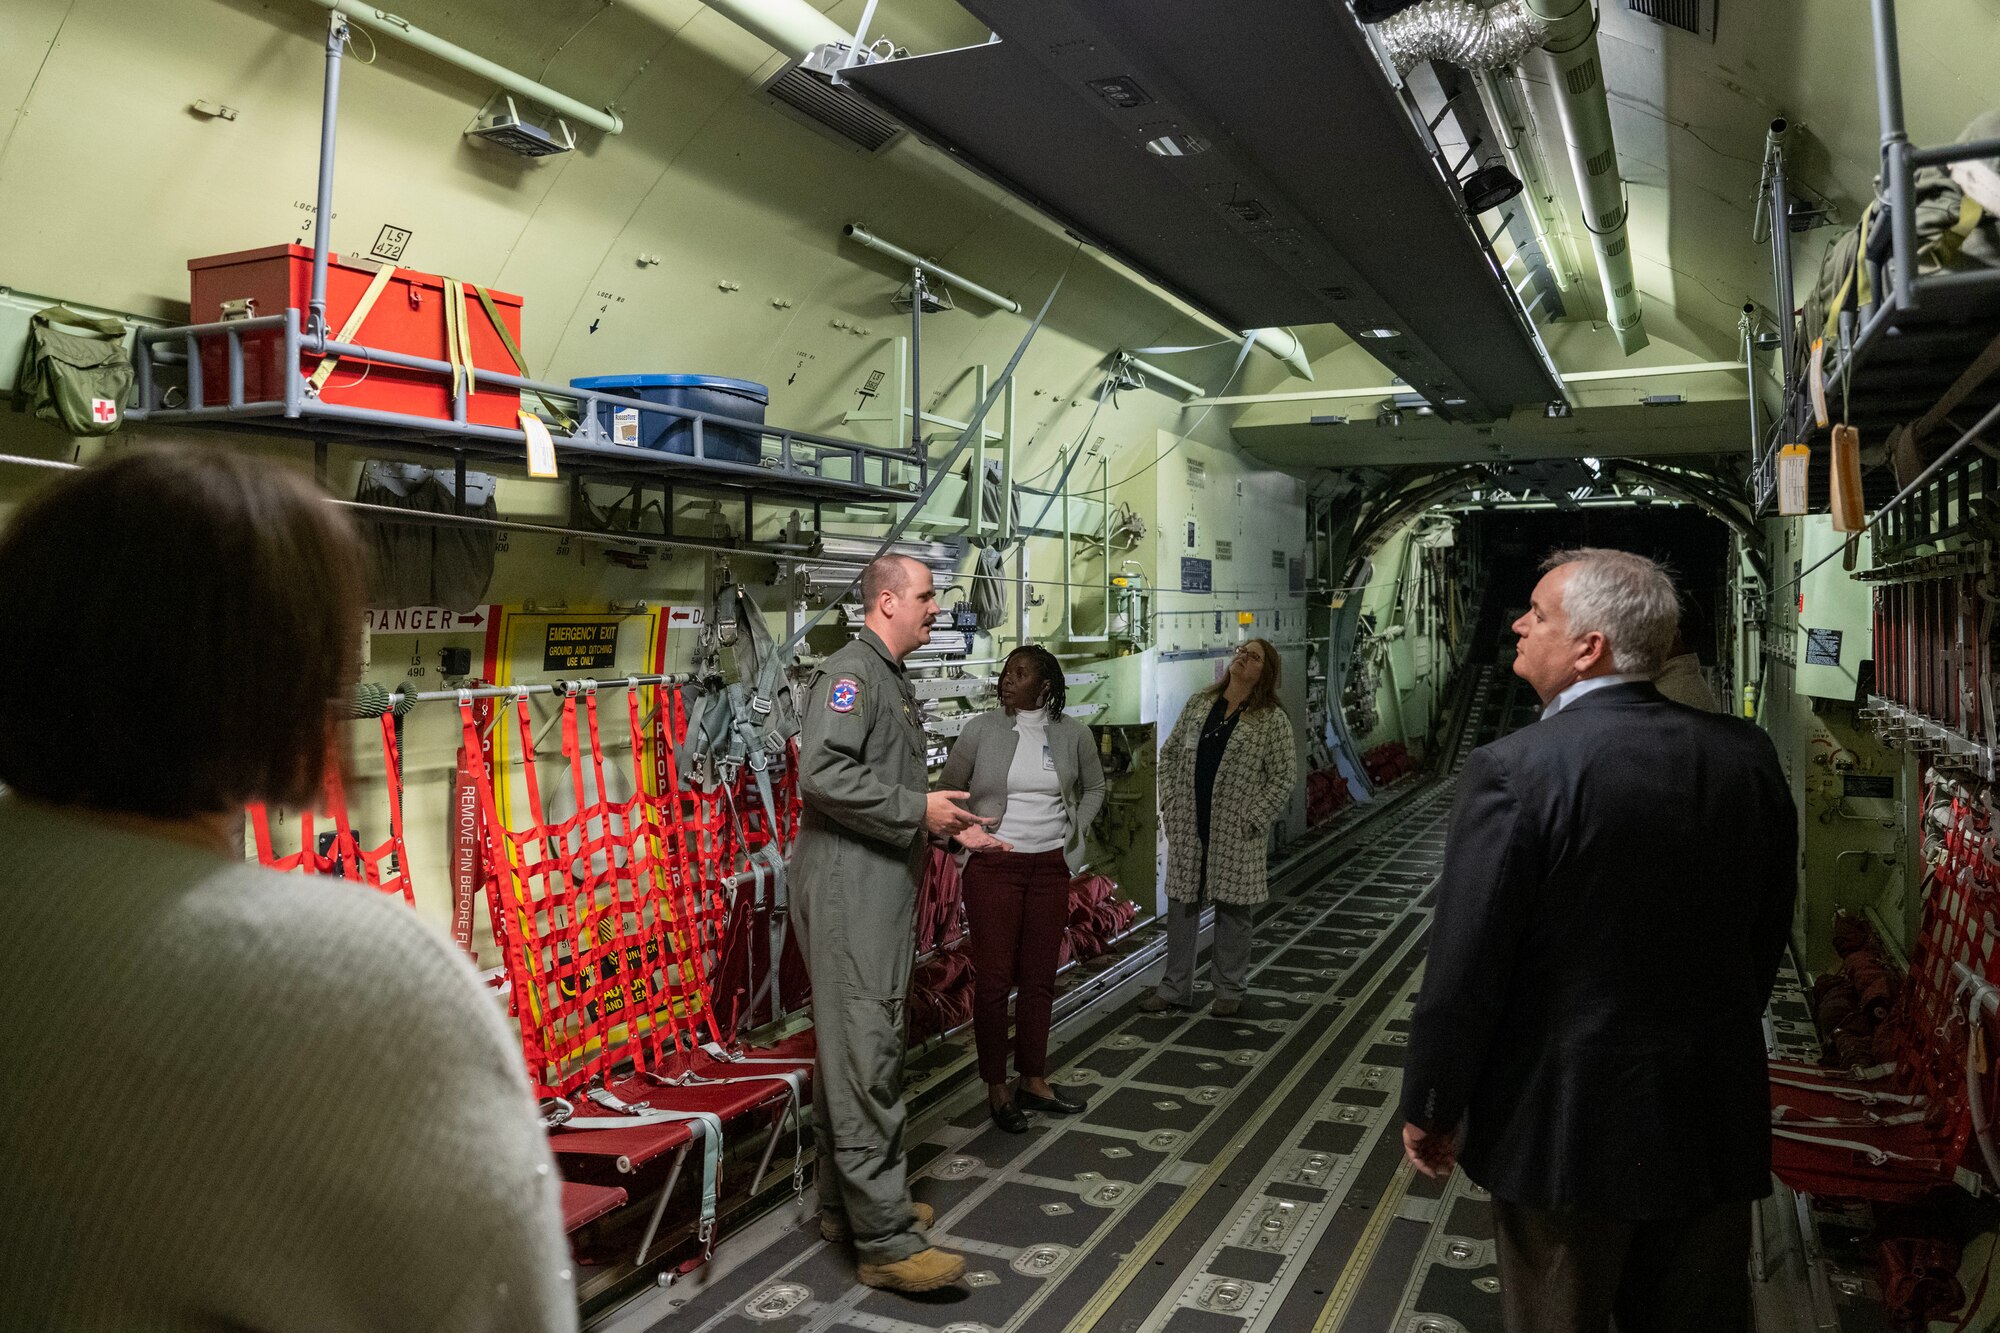 People stand inside a C-130 aircraft.